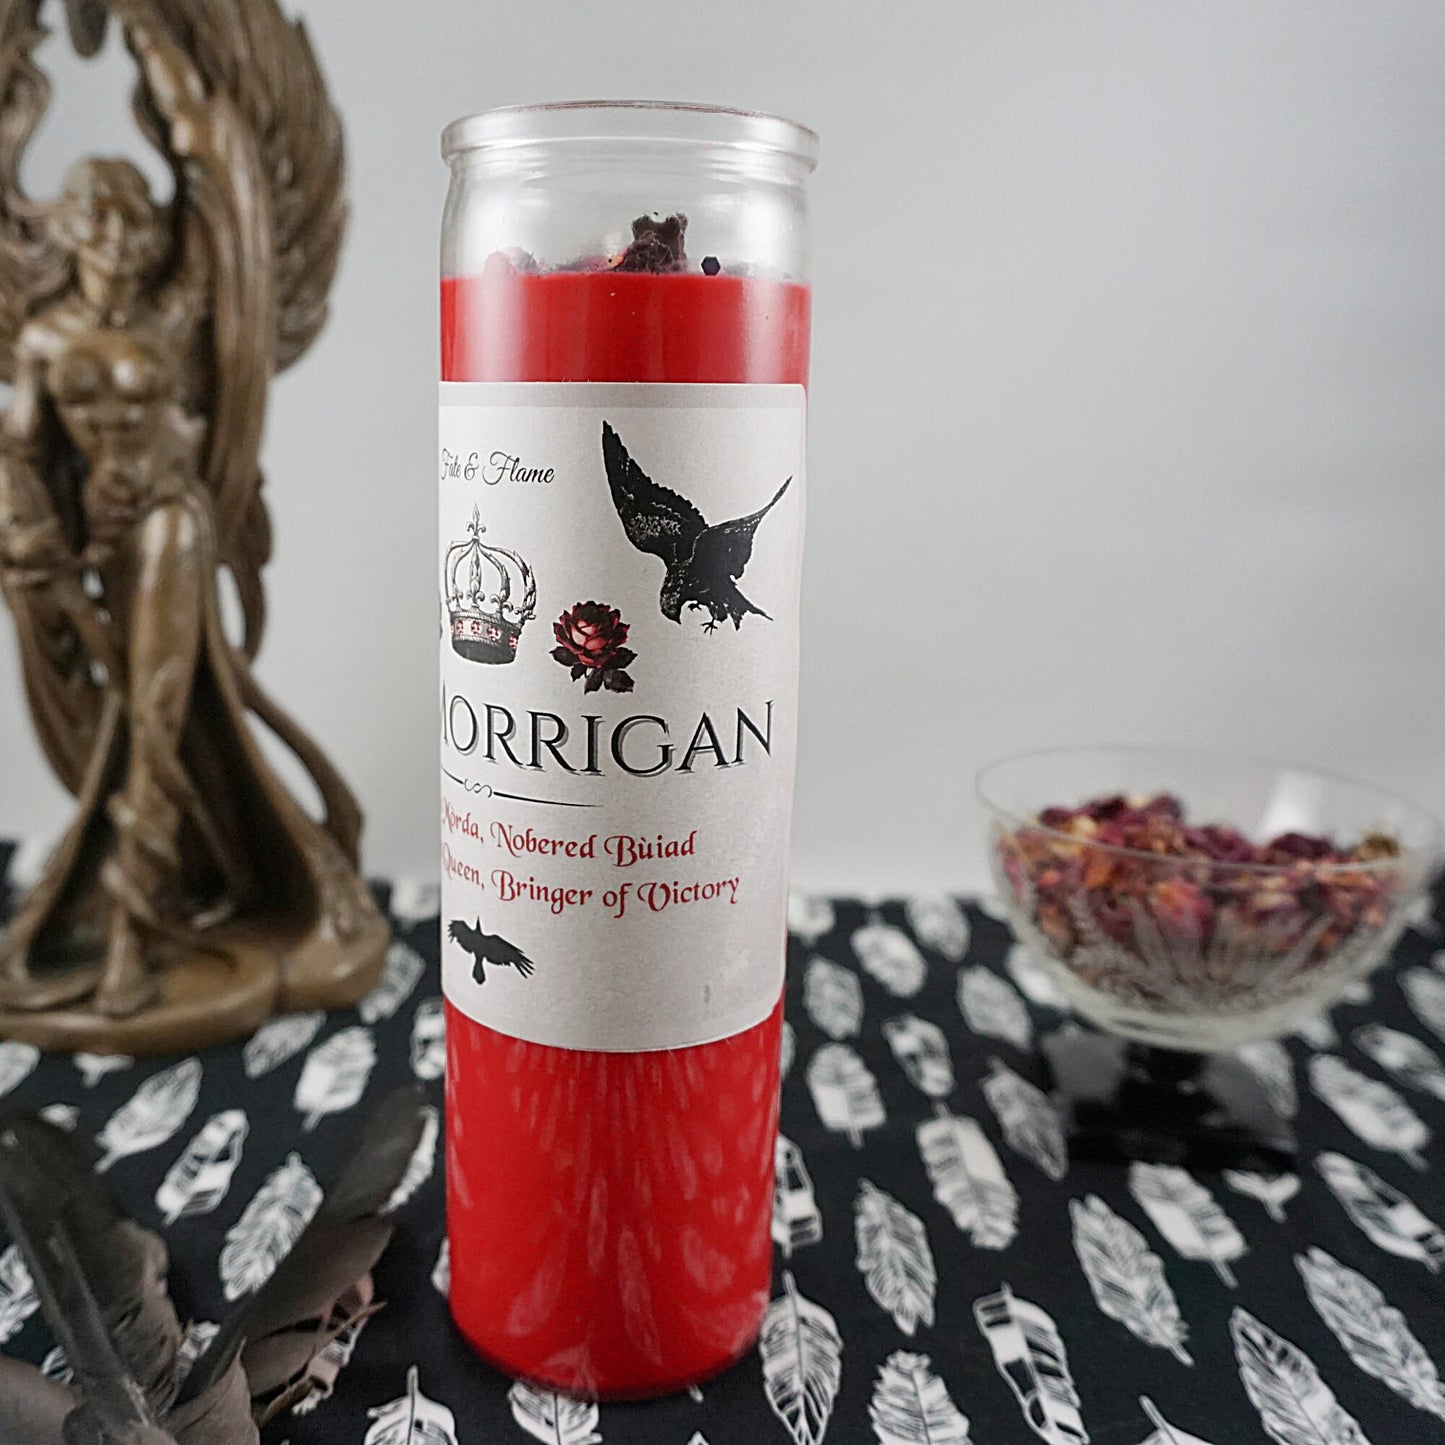 THE MORRIGAN Ritual Candle | Invocation, Dark Goddess Offering, Prophecy, Power, Strength